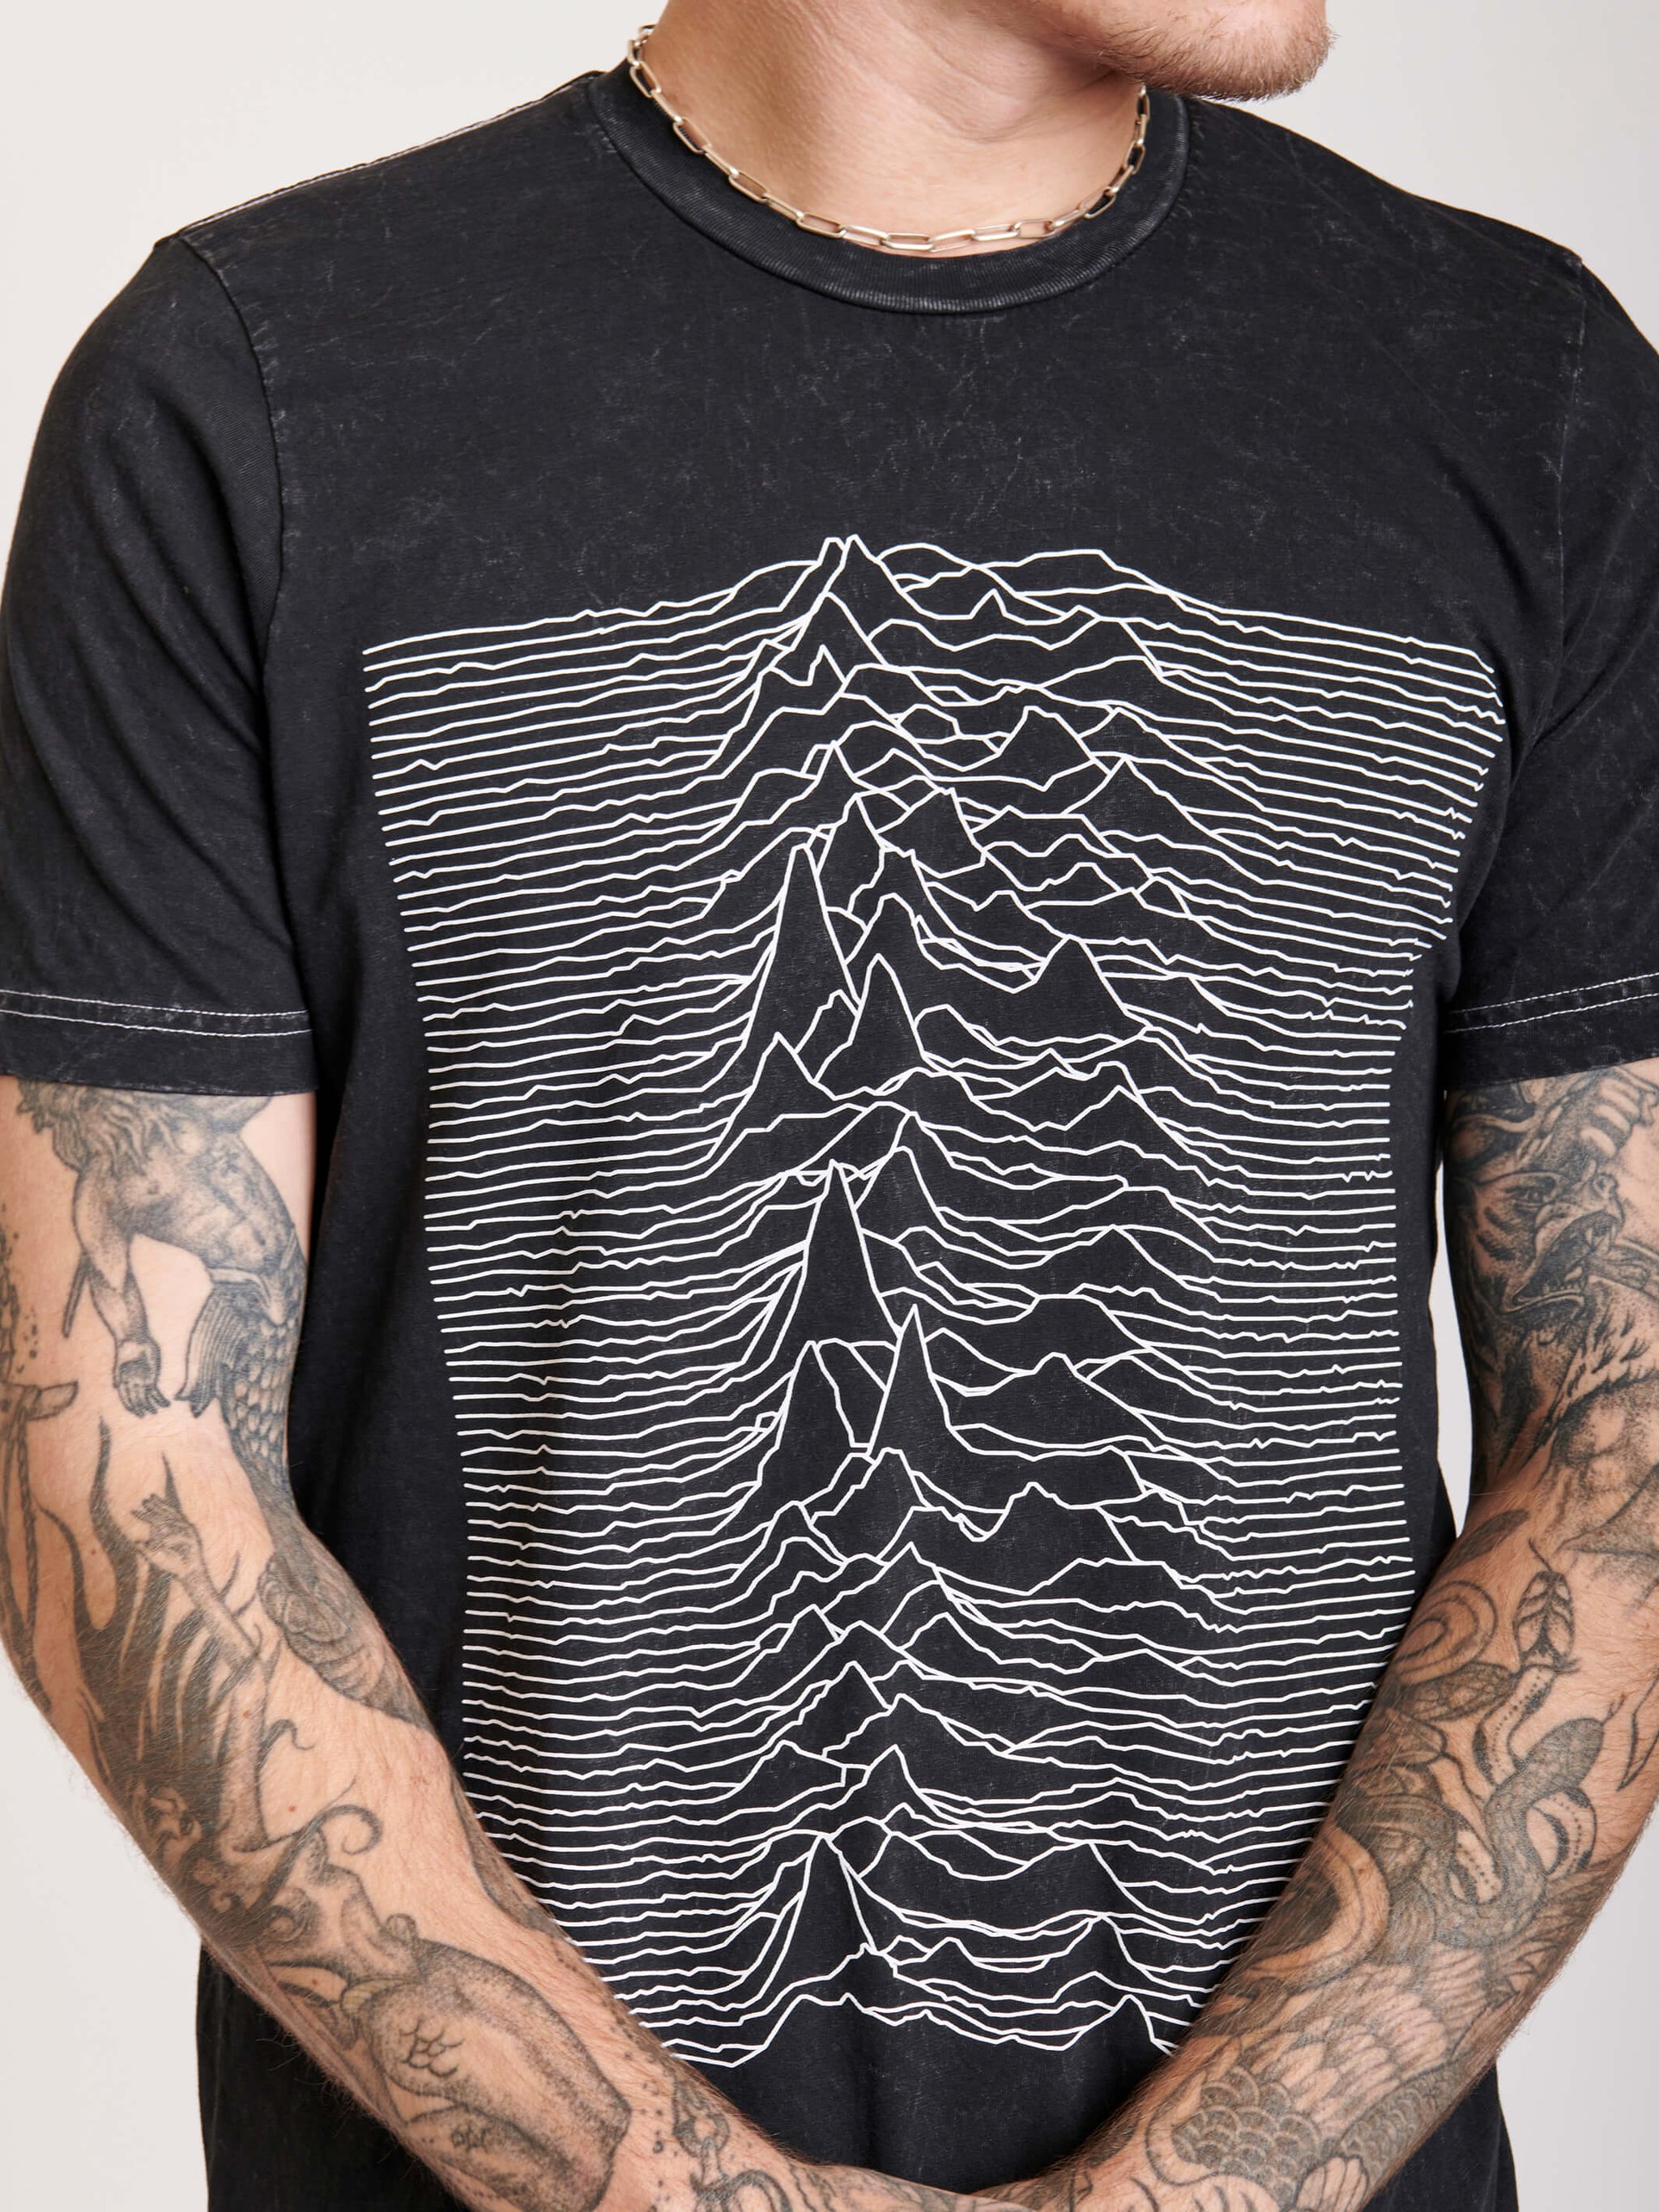 Mineral Wash Unknown Pleasures T-shirt